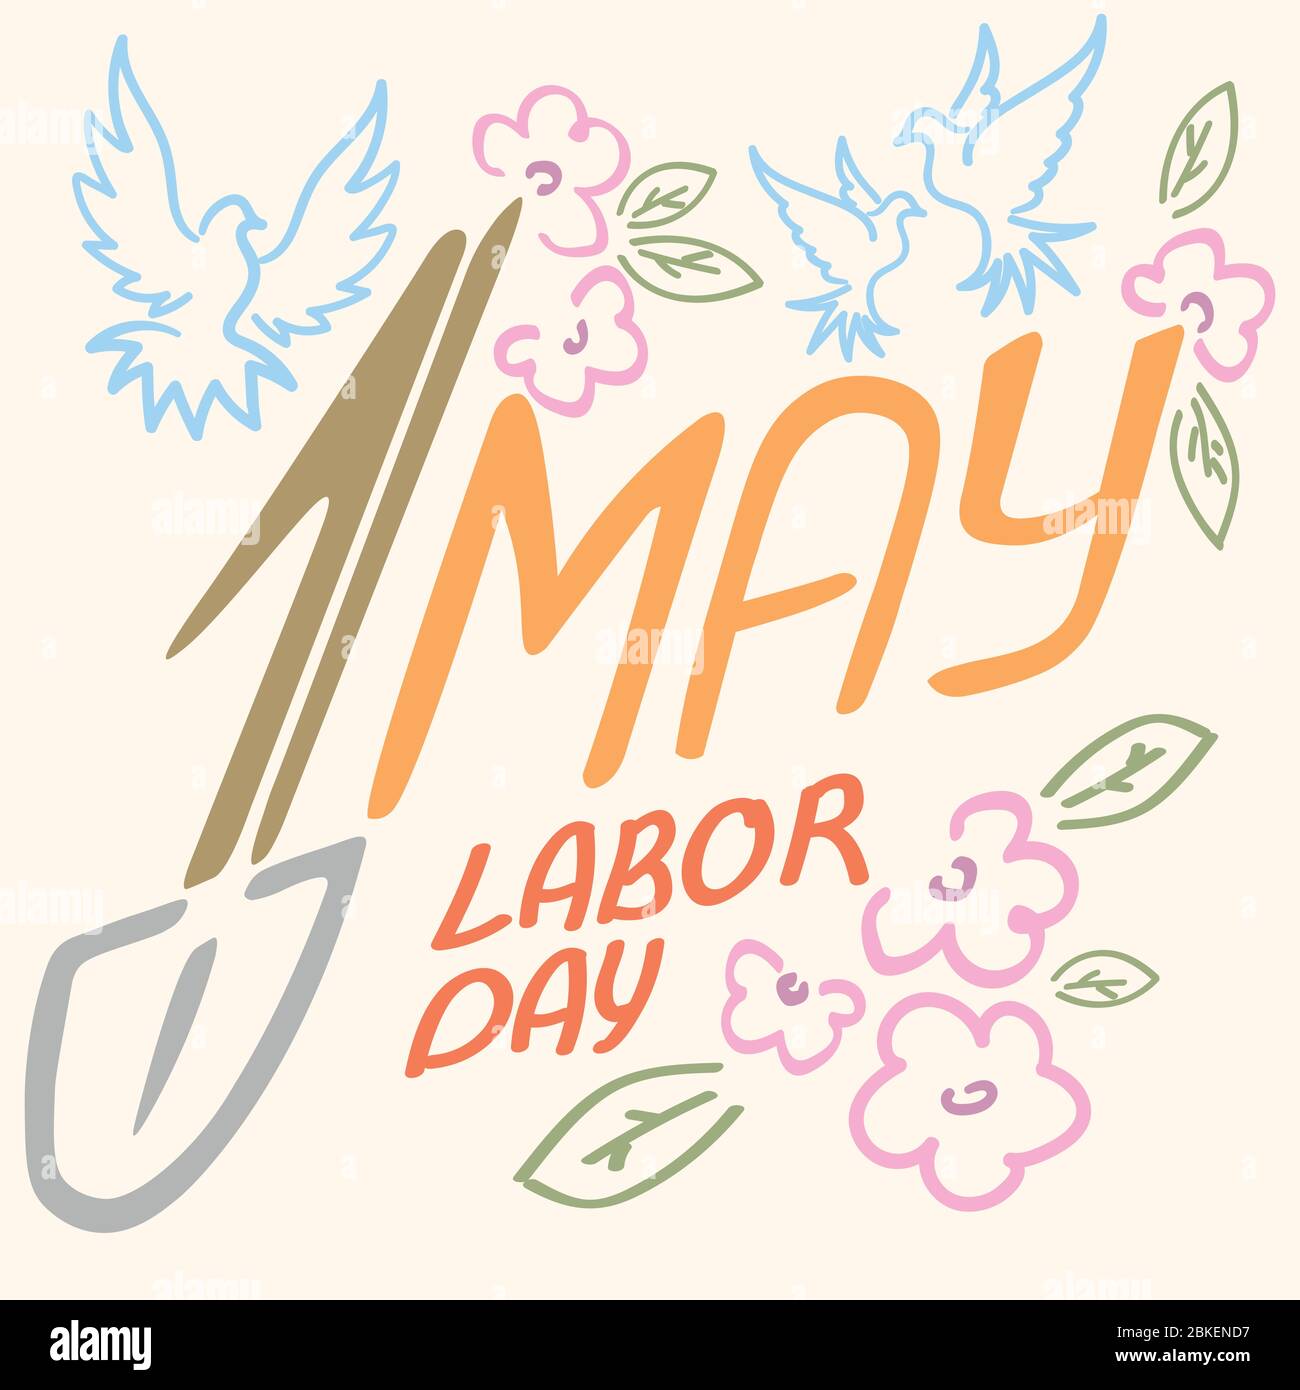 May 1 Labor Day logo symbol of pigeon, spring flowers spade holiday weekend. Stock Vector